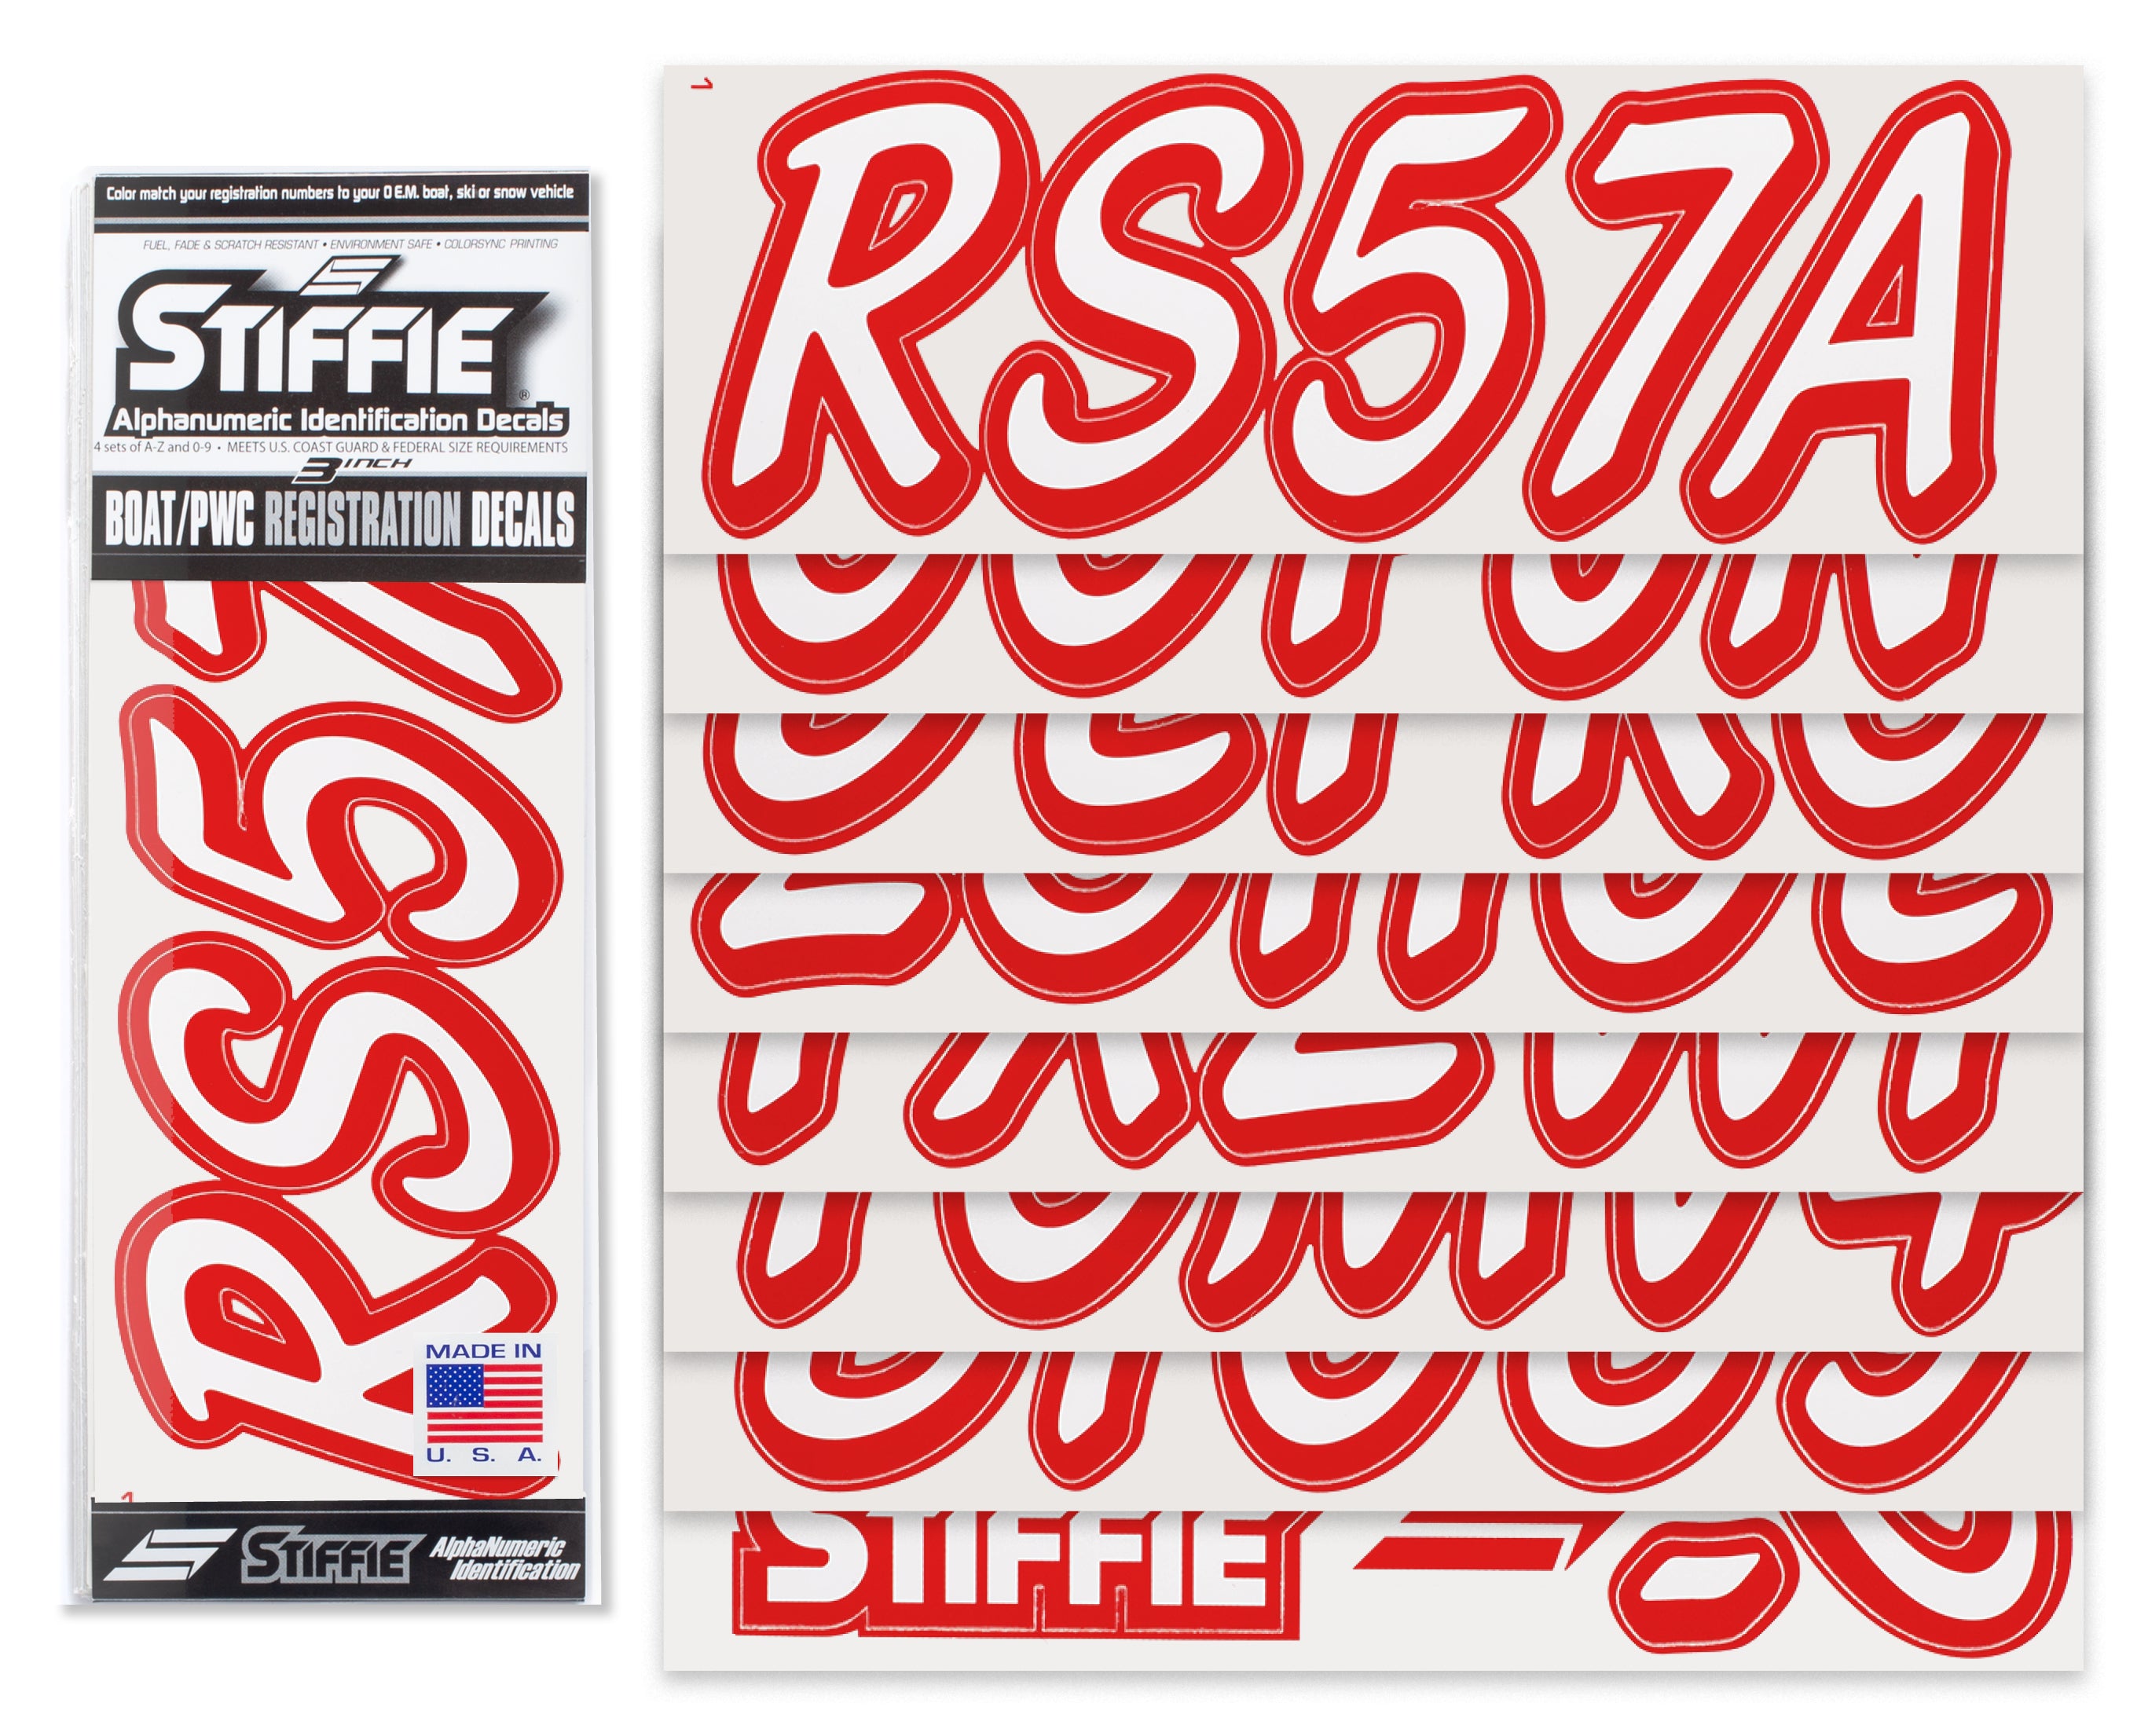 STIFFIE Whipline Solid White/Red 3" Alpha-Numeric Registration Identification Numbers Stickers Decals for Boats & Personal Watercraft